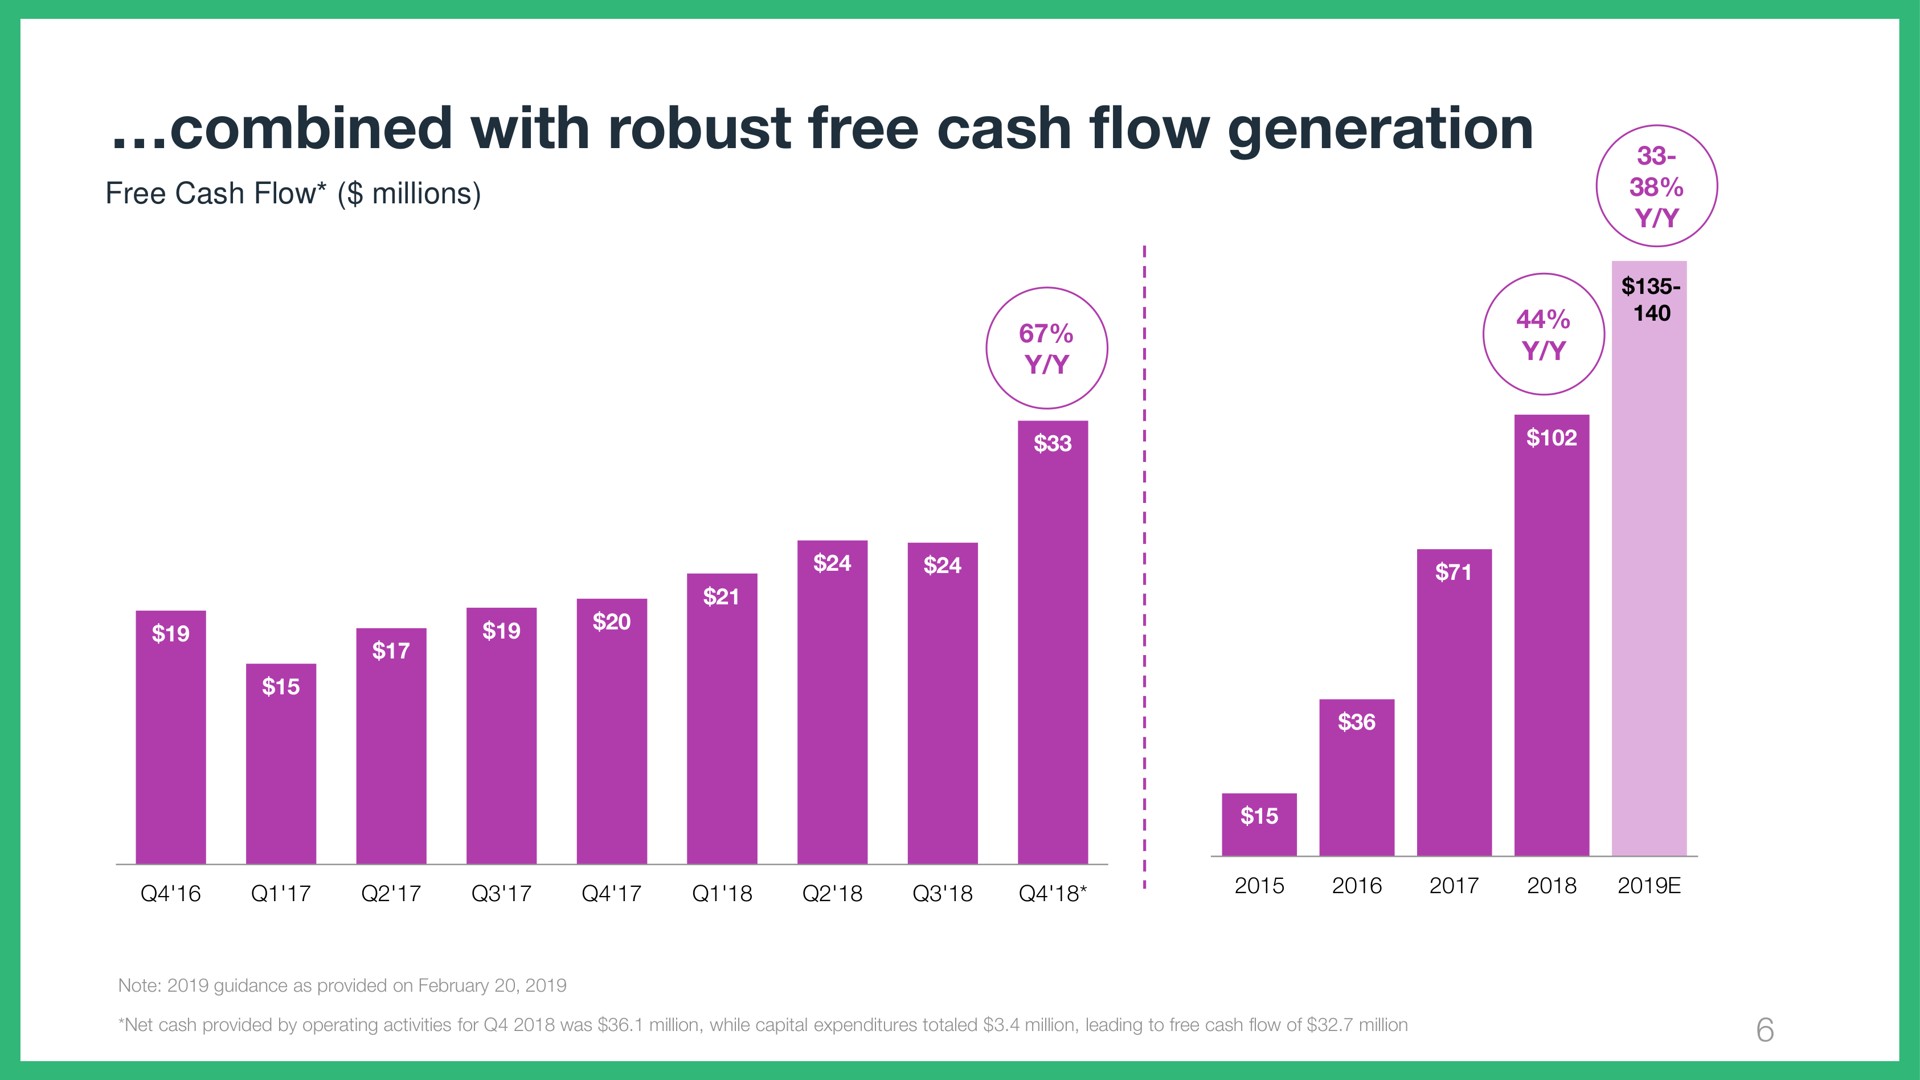 combined with robust free cash flow generation combined | Wix